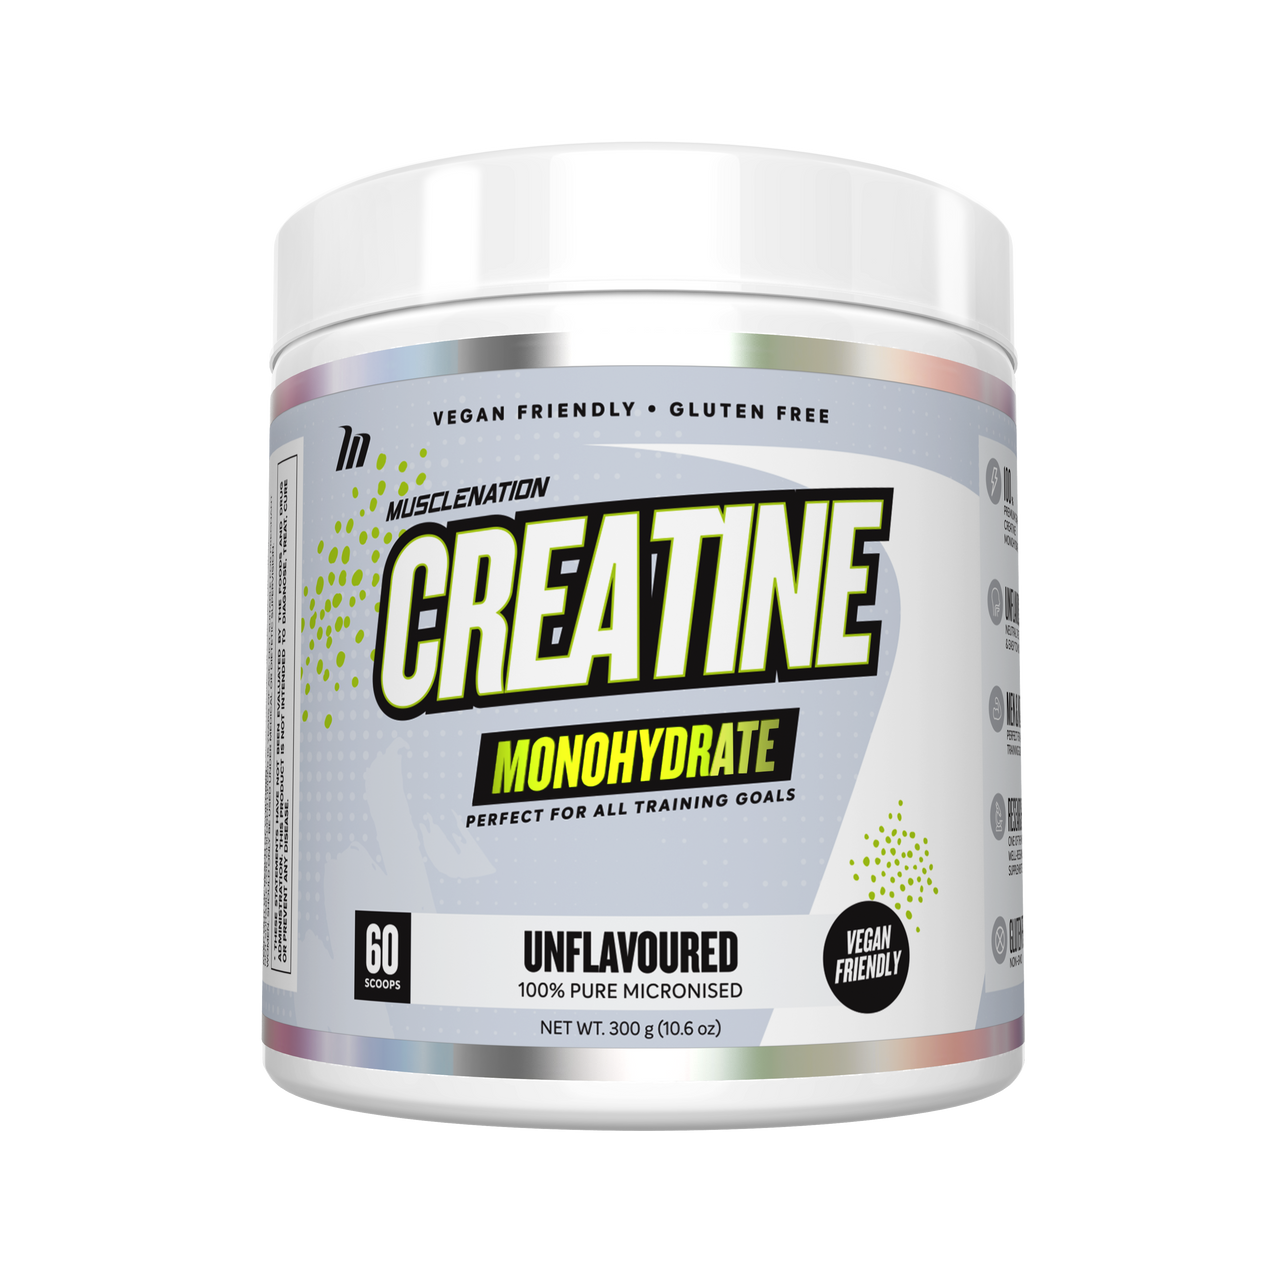 Muscle Nation Creatine Monohydrate - Super Nutrition